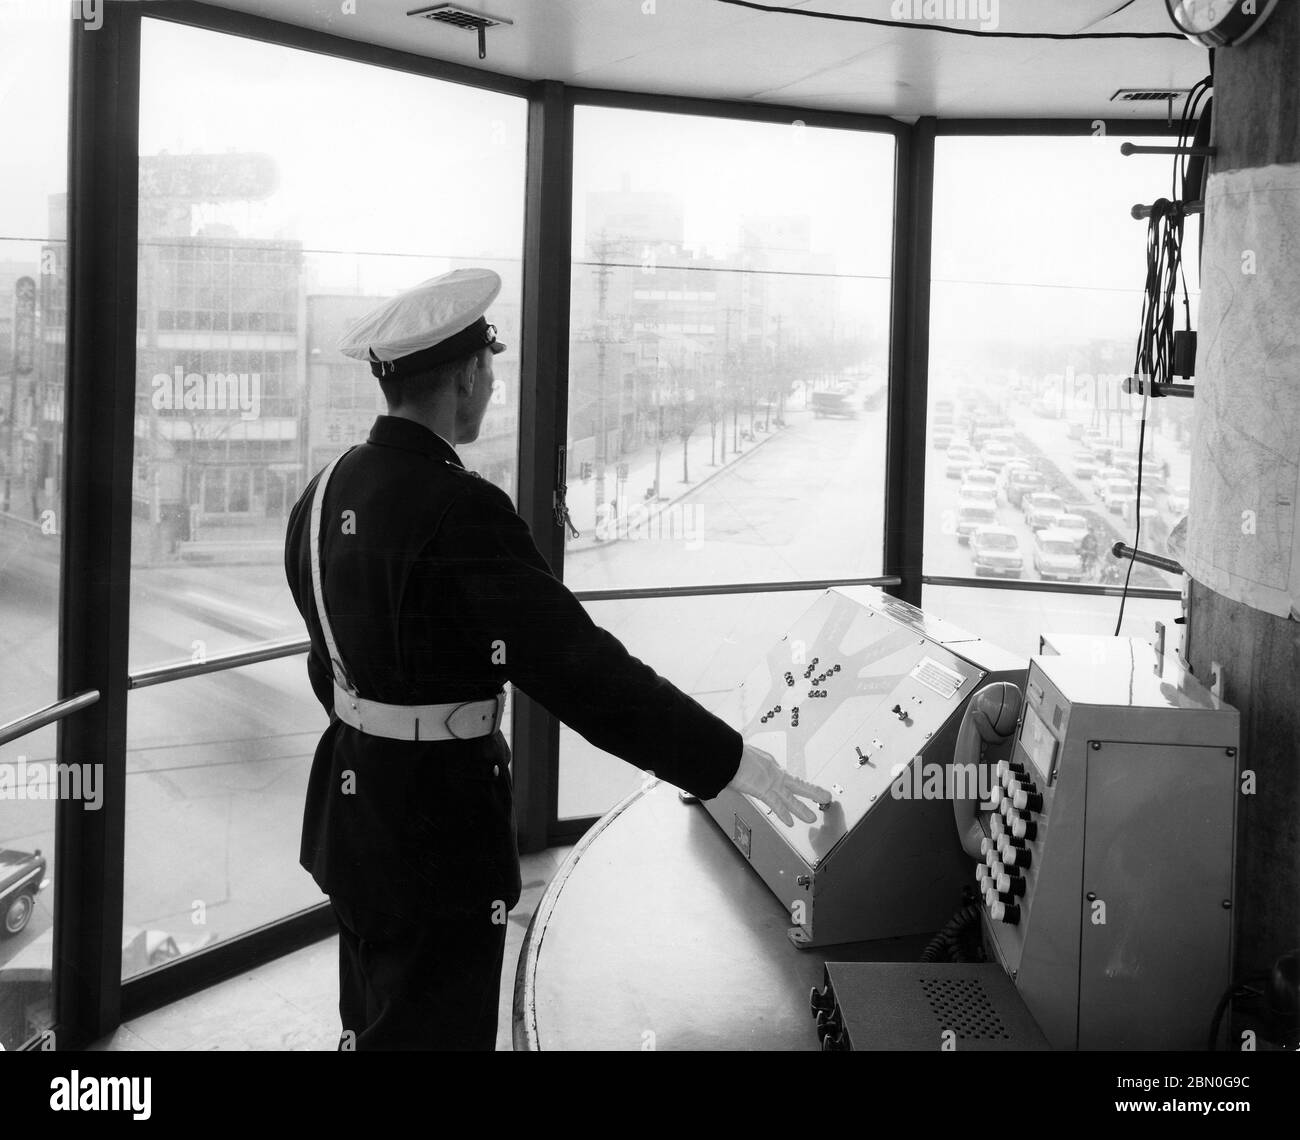 [ 1960s Japan - Ikebukuro Traffic Control Tower, Tokyo ] —   A Japanese police officer observes the traffic from the Traffic Control Tower (コントロールタワー・操車室) at the Mutsumata Rotary (六ツ又交差点) in Ikebukuro, Tokyo, ca. 1965 (Showa 40).  The 11 meter high tower started operations in November 1962 (Showa 37) and reduced the accidents that took place at this location from several hundreds to just a few dozen.  The tower was torn down on August 22, 1968 (Showa 43) to allow construction of the elevated highway Route 5.  20th century gelatin silver print. Stock Photo